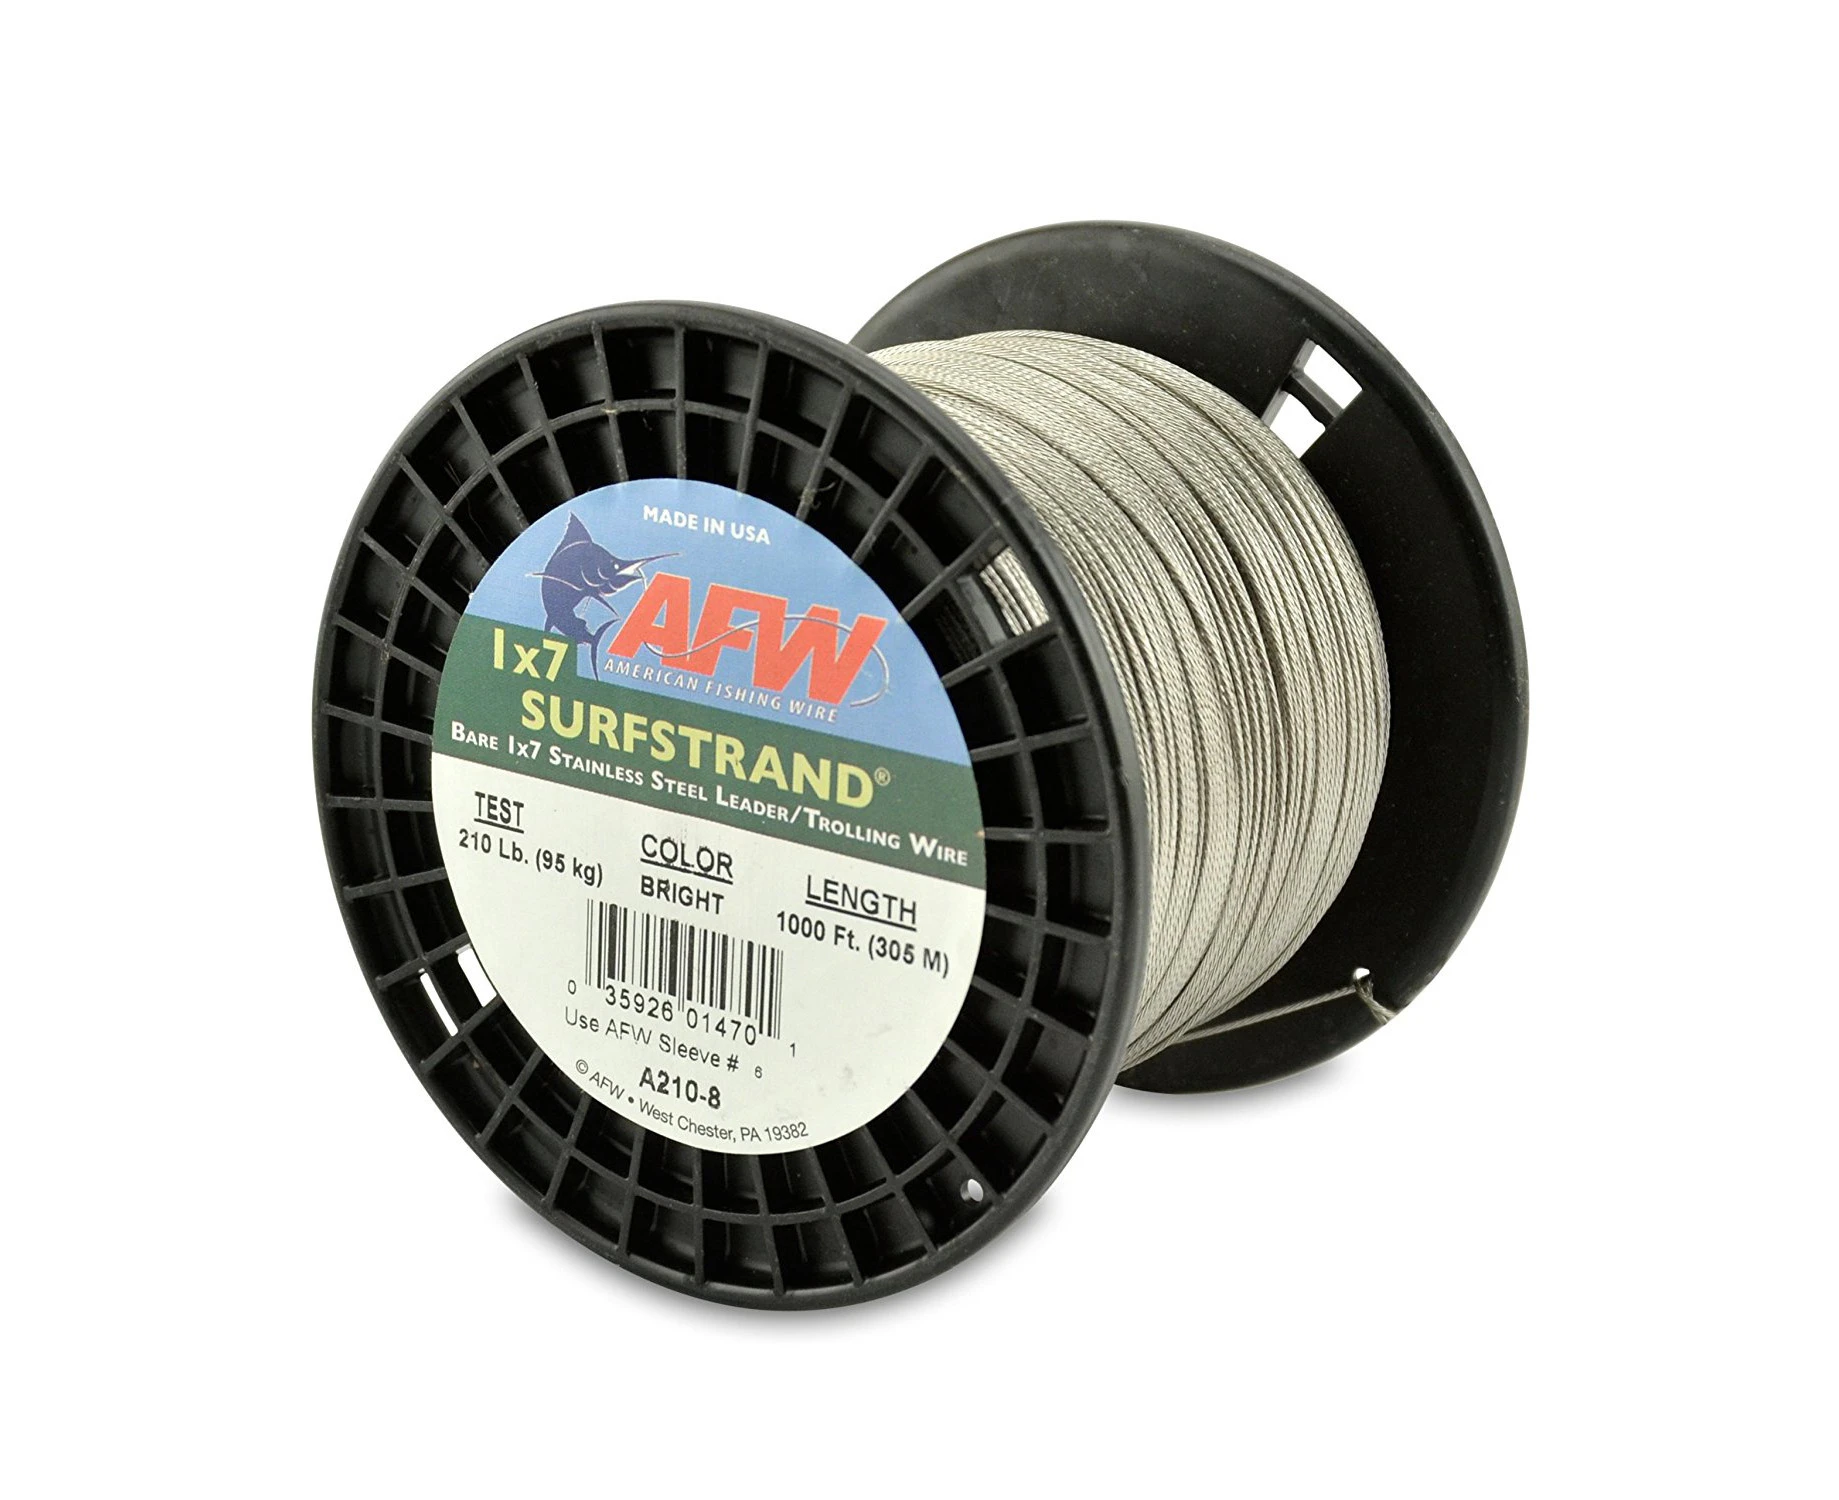 Surfstrand, Bare 1x7 Stainless Steel Leader Wire, 45 lb (20 kg